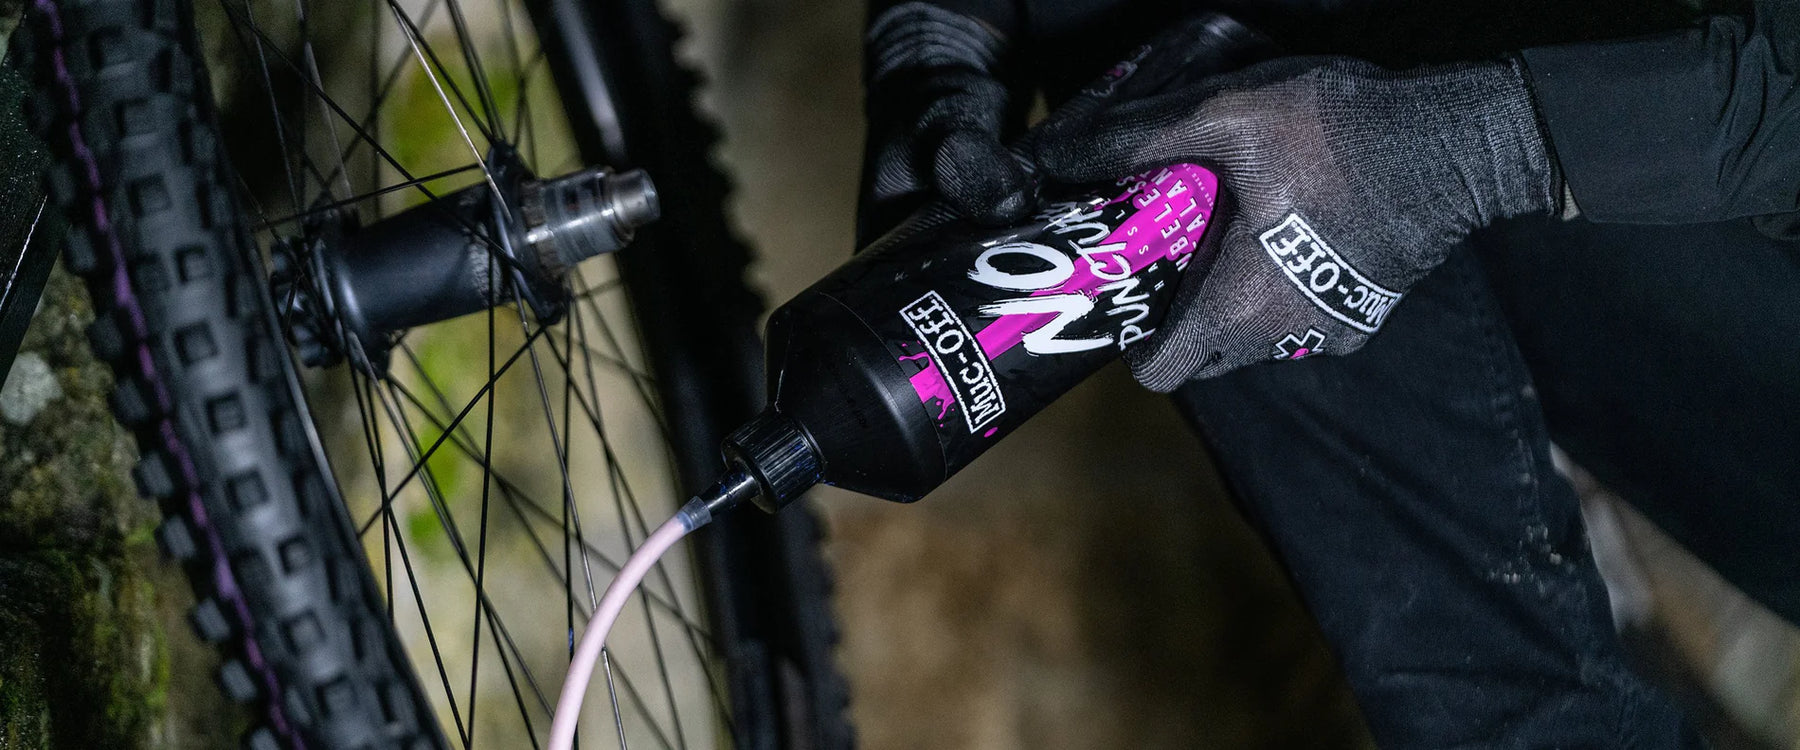 Muc Off No Puncture Hassle Tubeless Sealant